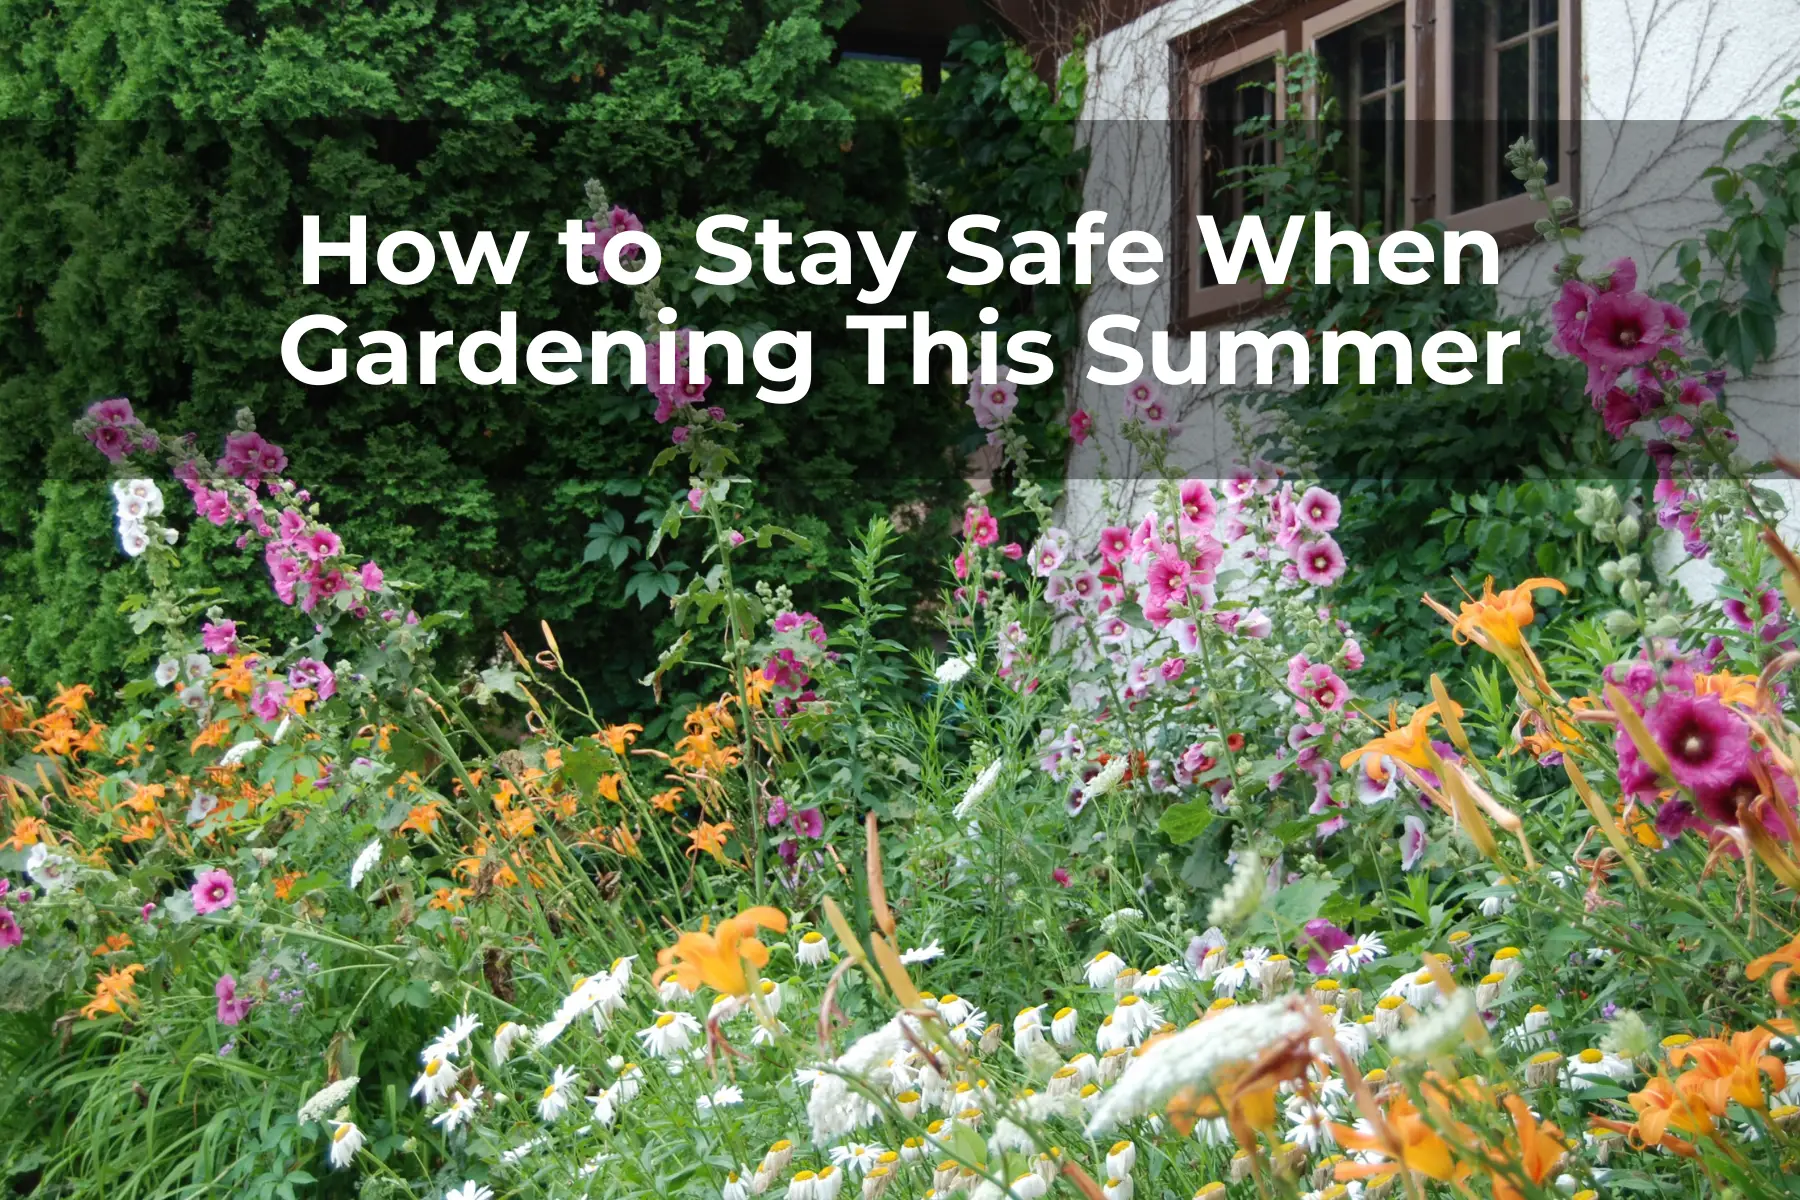 How to Stay Safe When Gardening This Summer